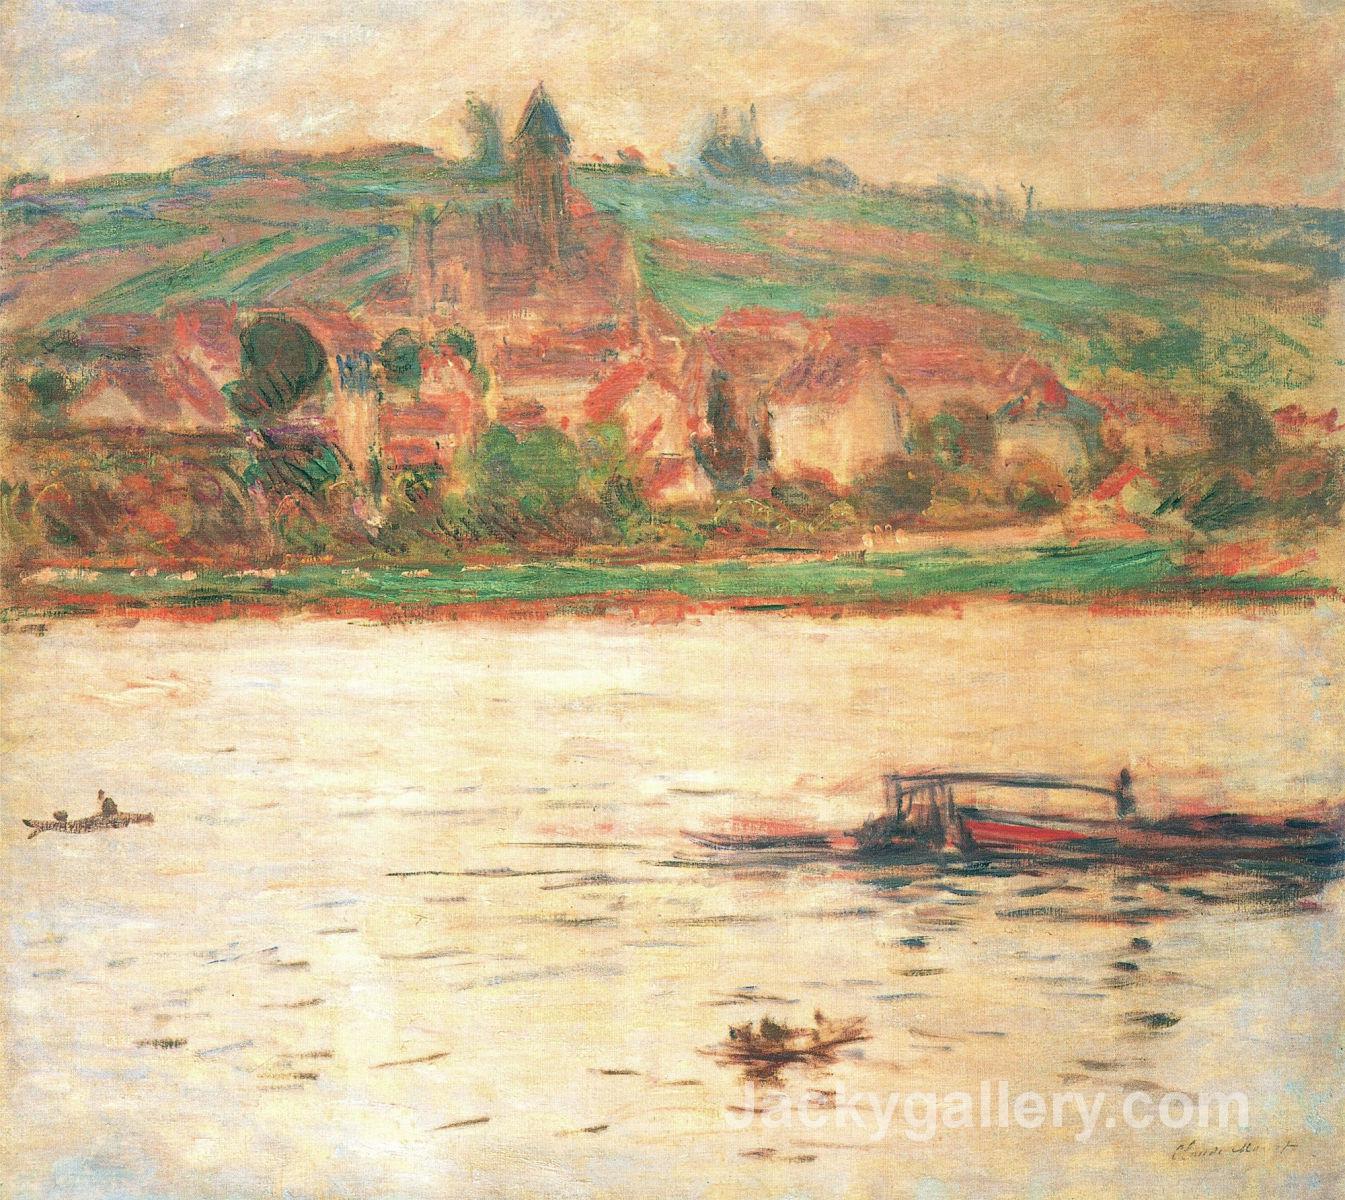 Vetheuil, Barge on the Seine by Claude Monet paintings reproduction